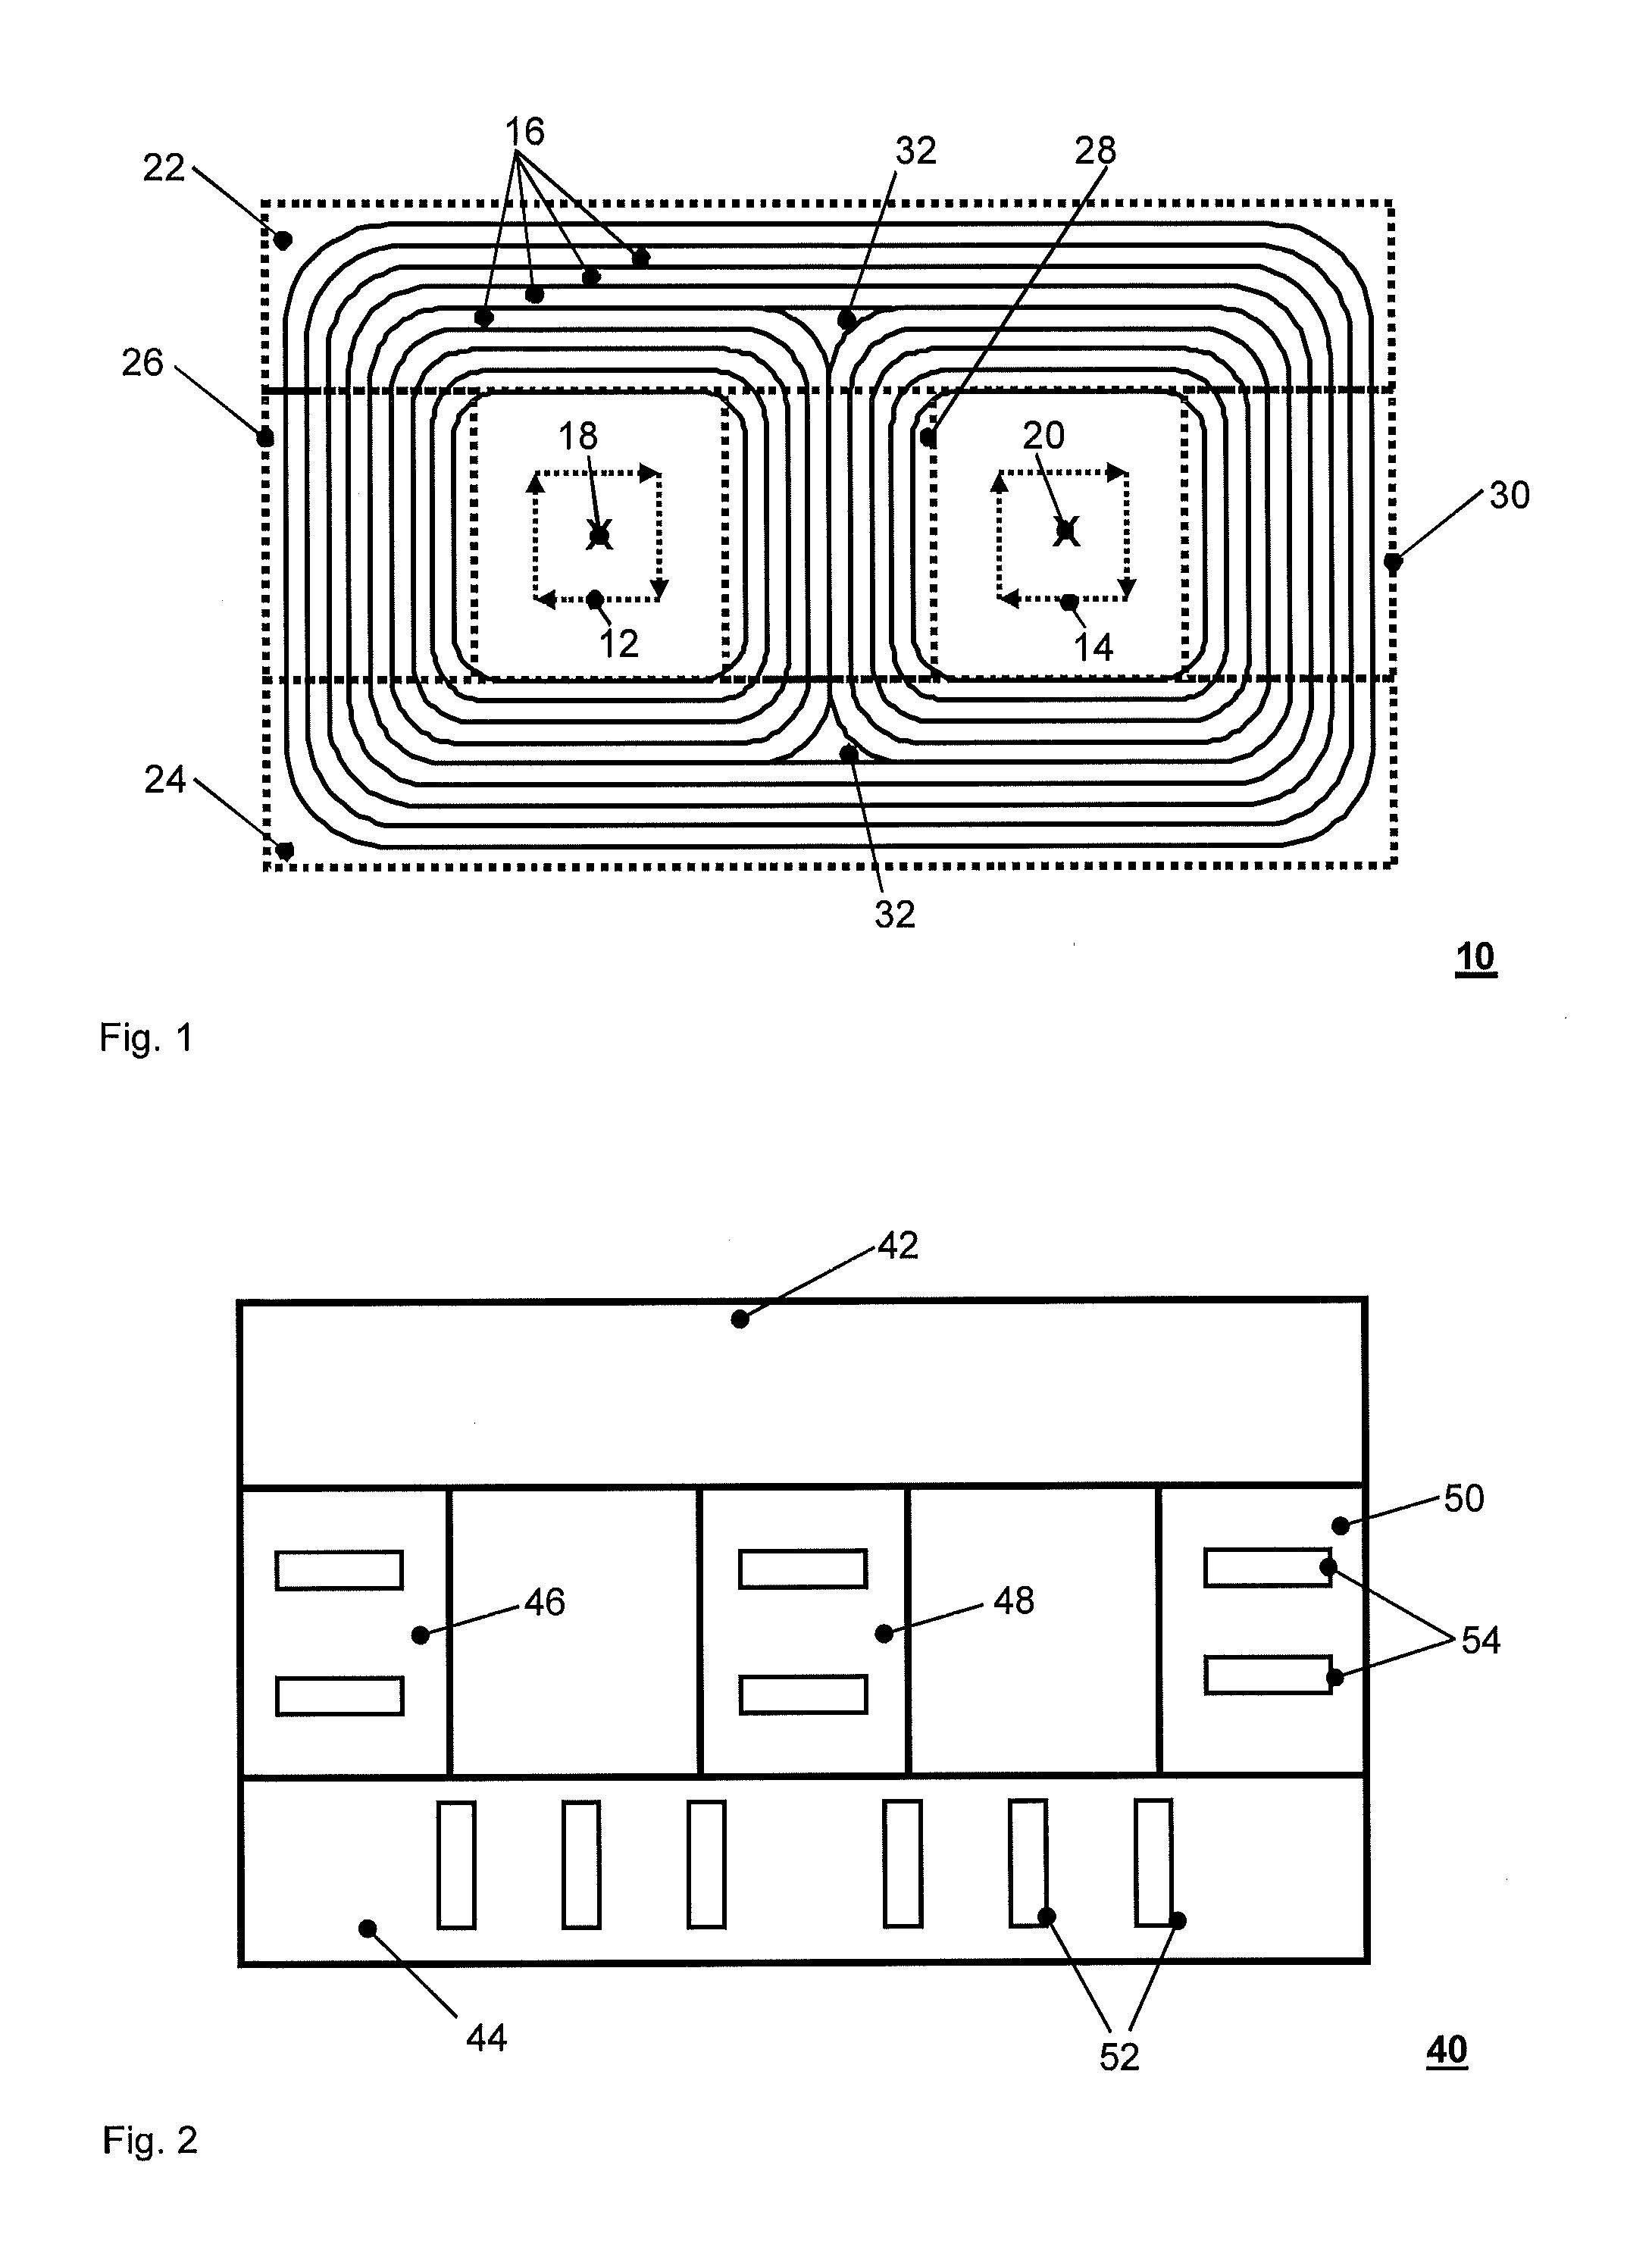 Wound transformer core with support structure